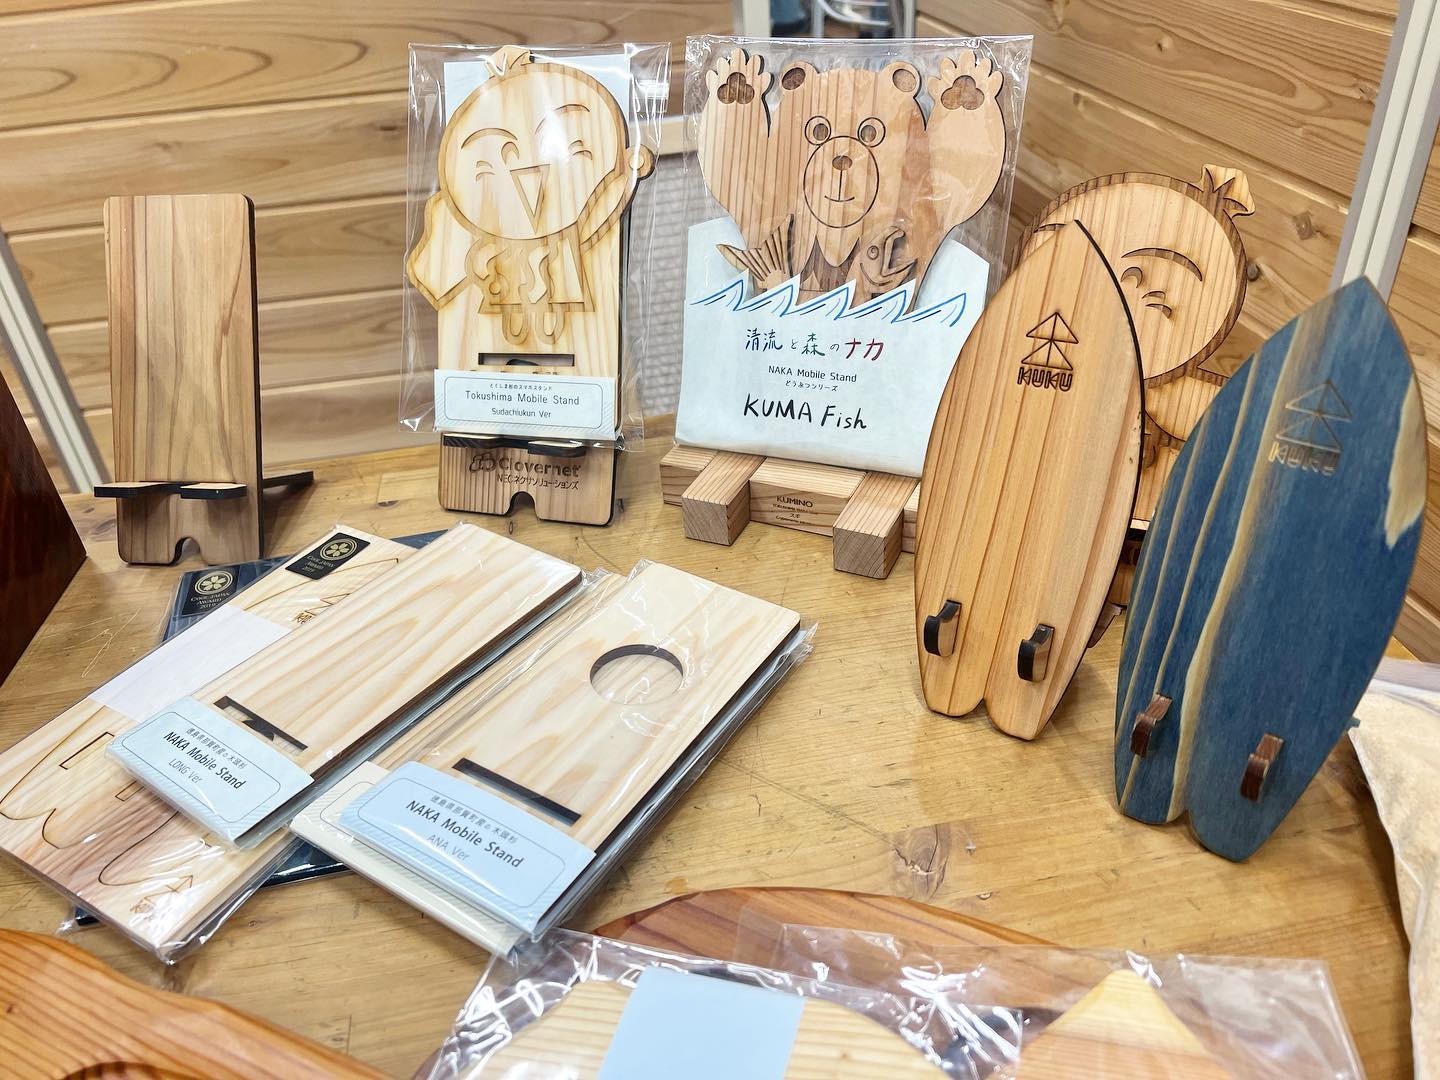 NAKA Mobile Stand みなとモデル展示会にて展示させていただきました！